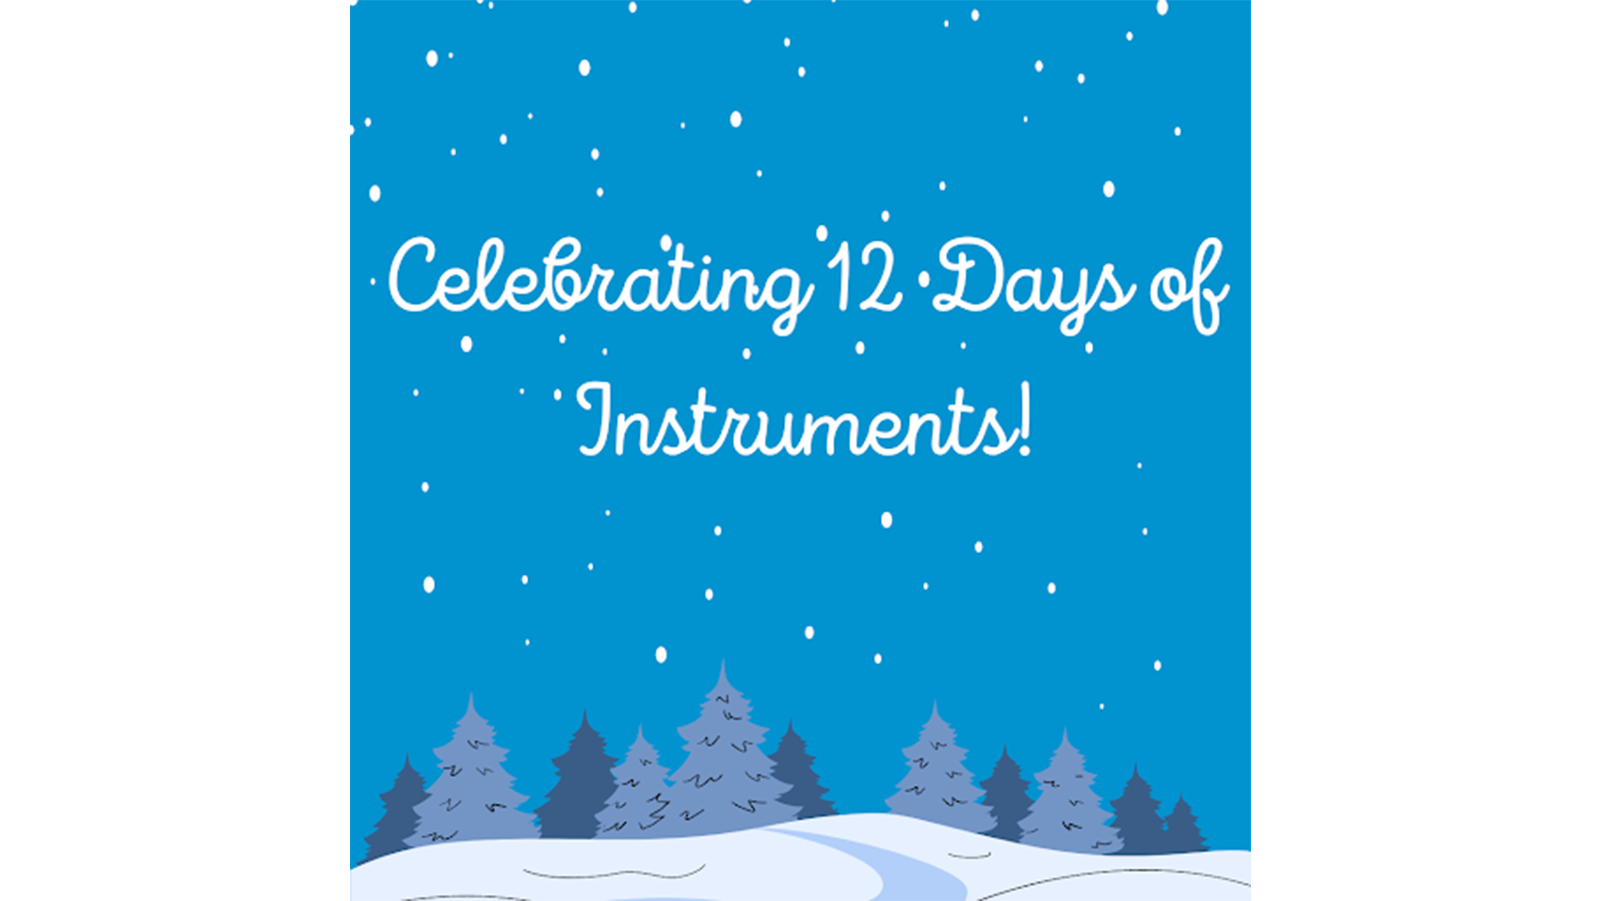 A light blue background with dark blue and gray Christmas trees at the bottom with white text that reads "Celebrating 12 days of Instruments"